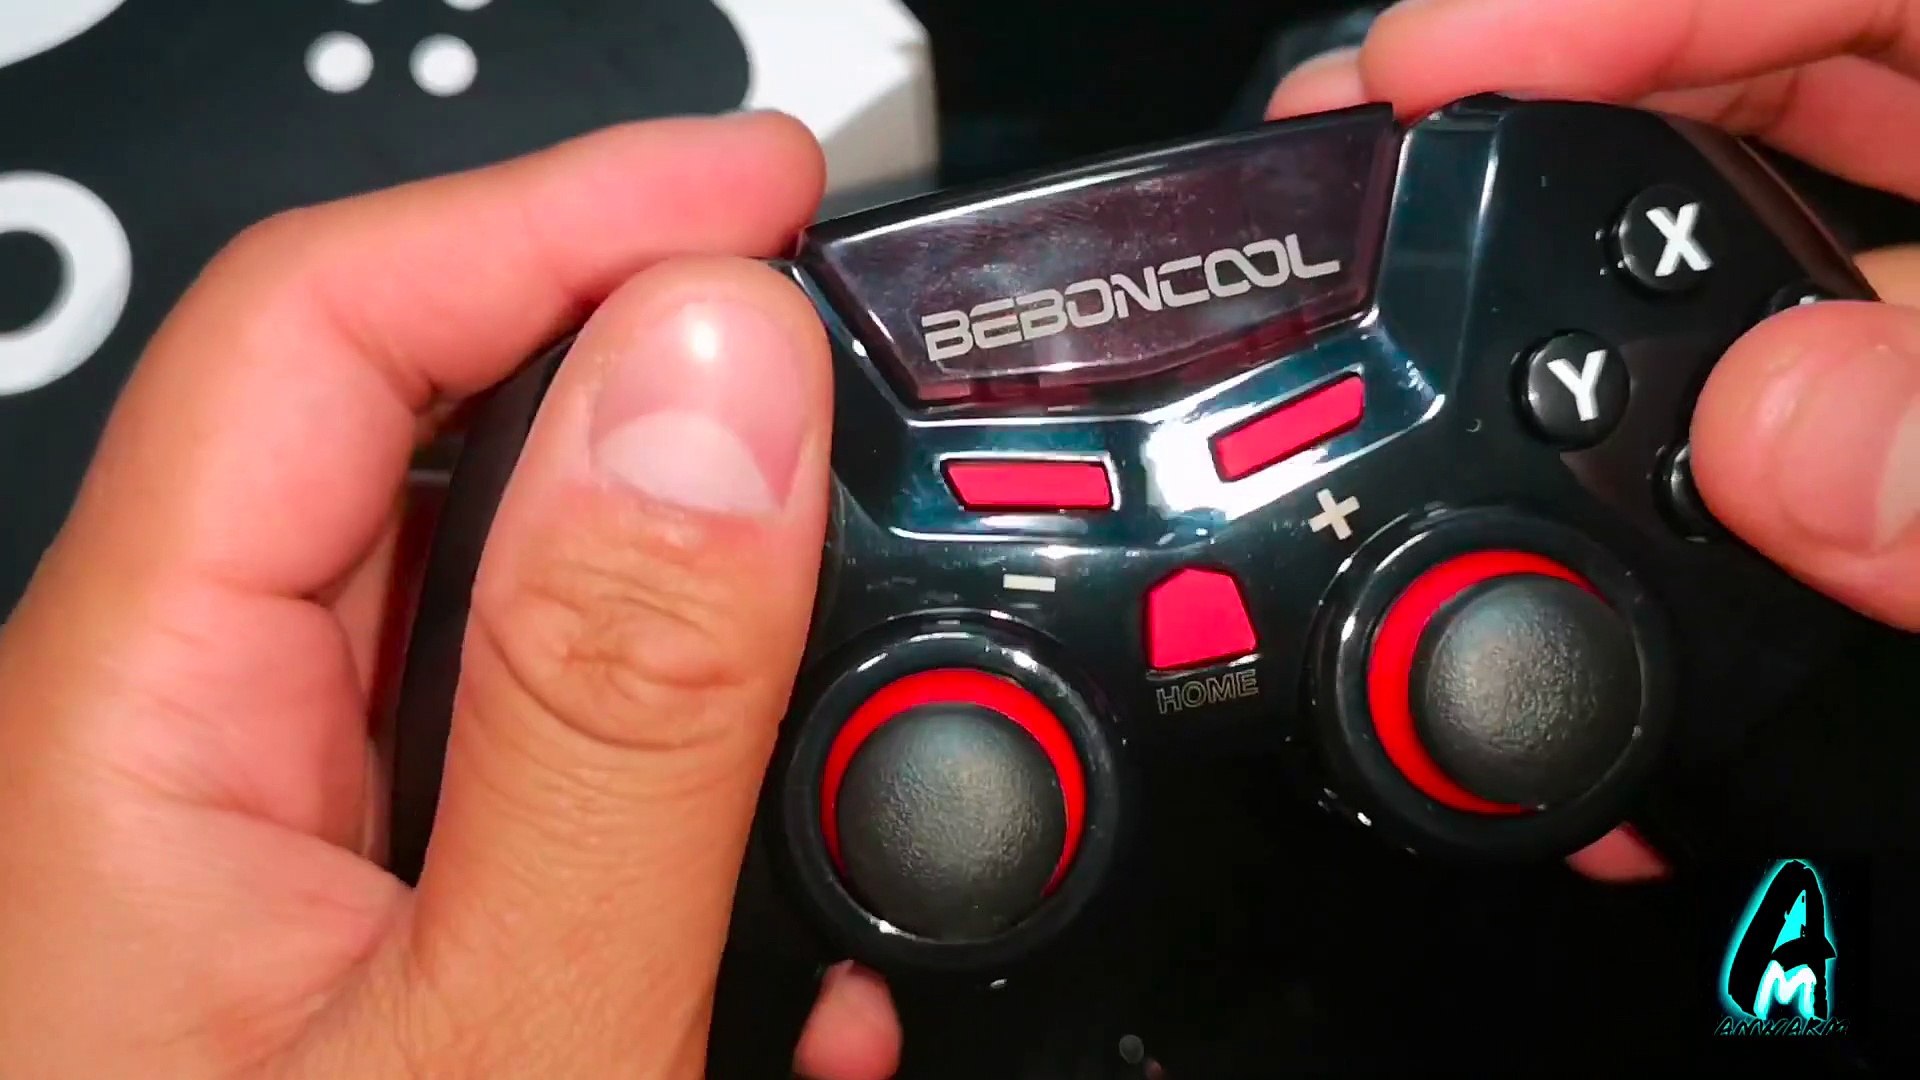 Beboncool Nintendo Switch Controller Q02 (Review) - video Dailymotion